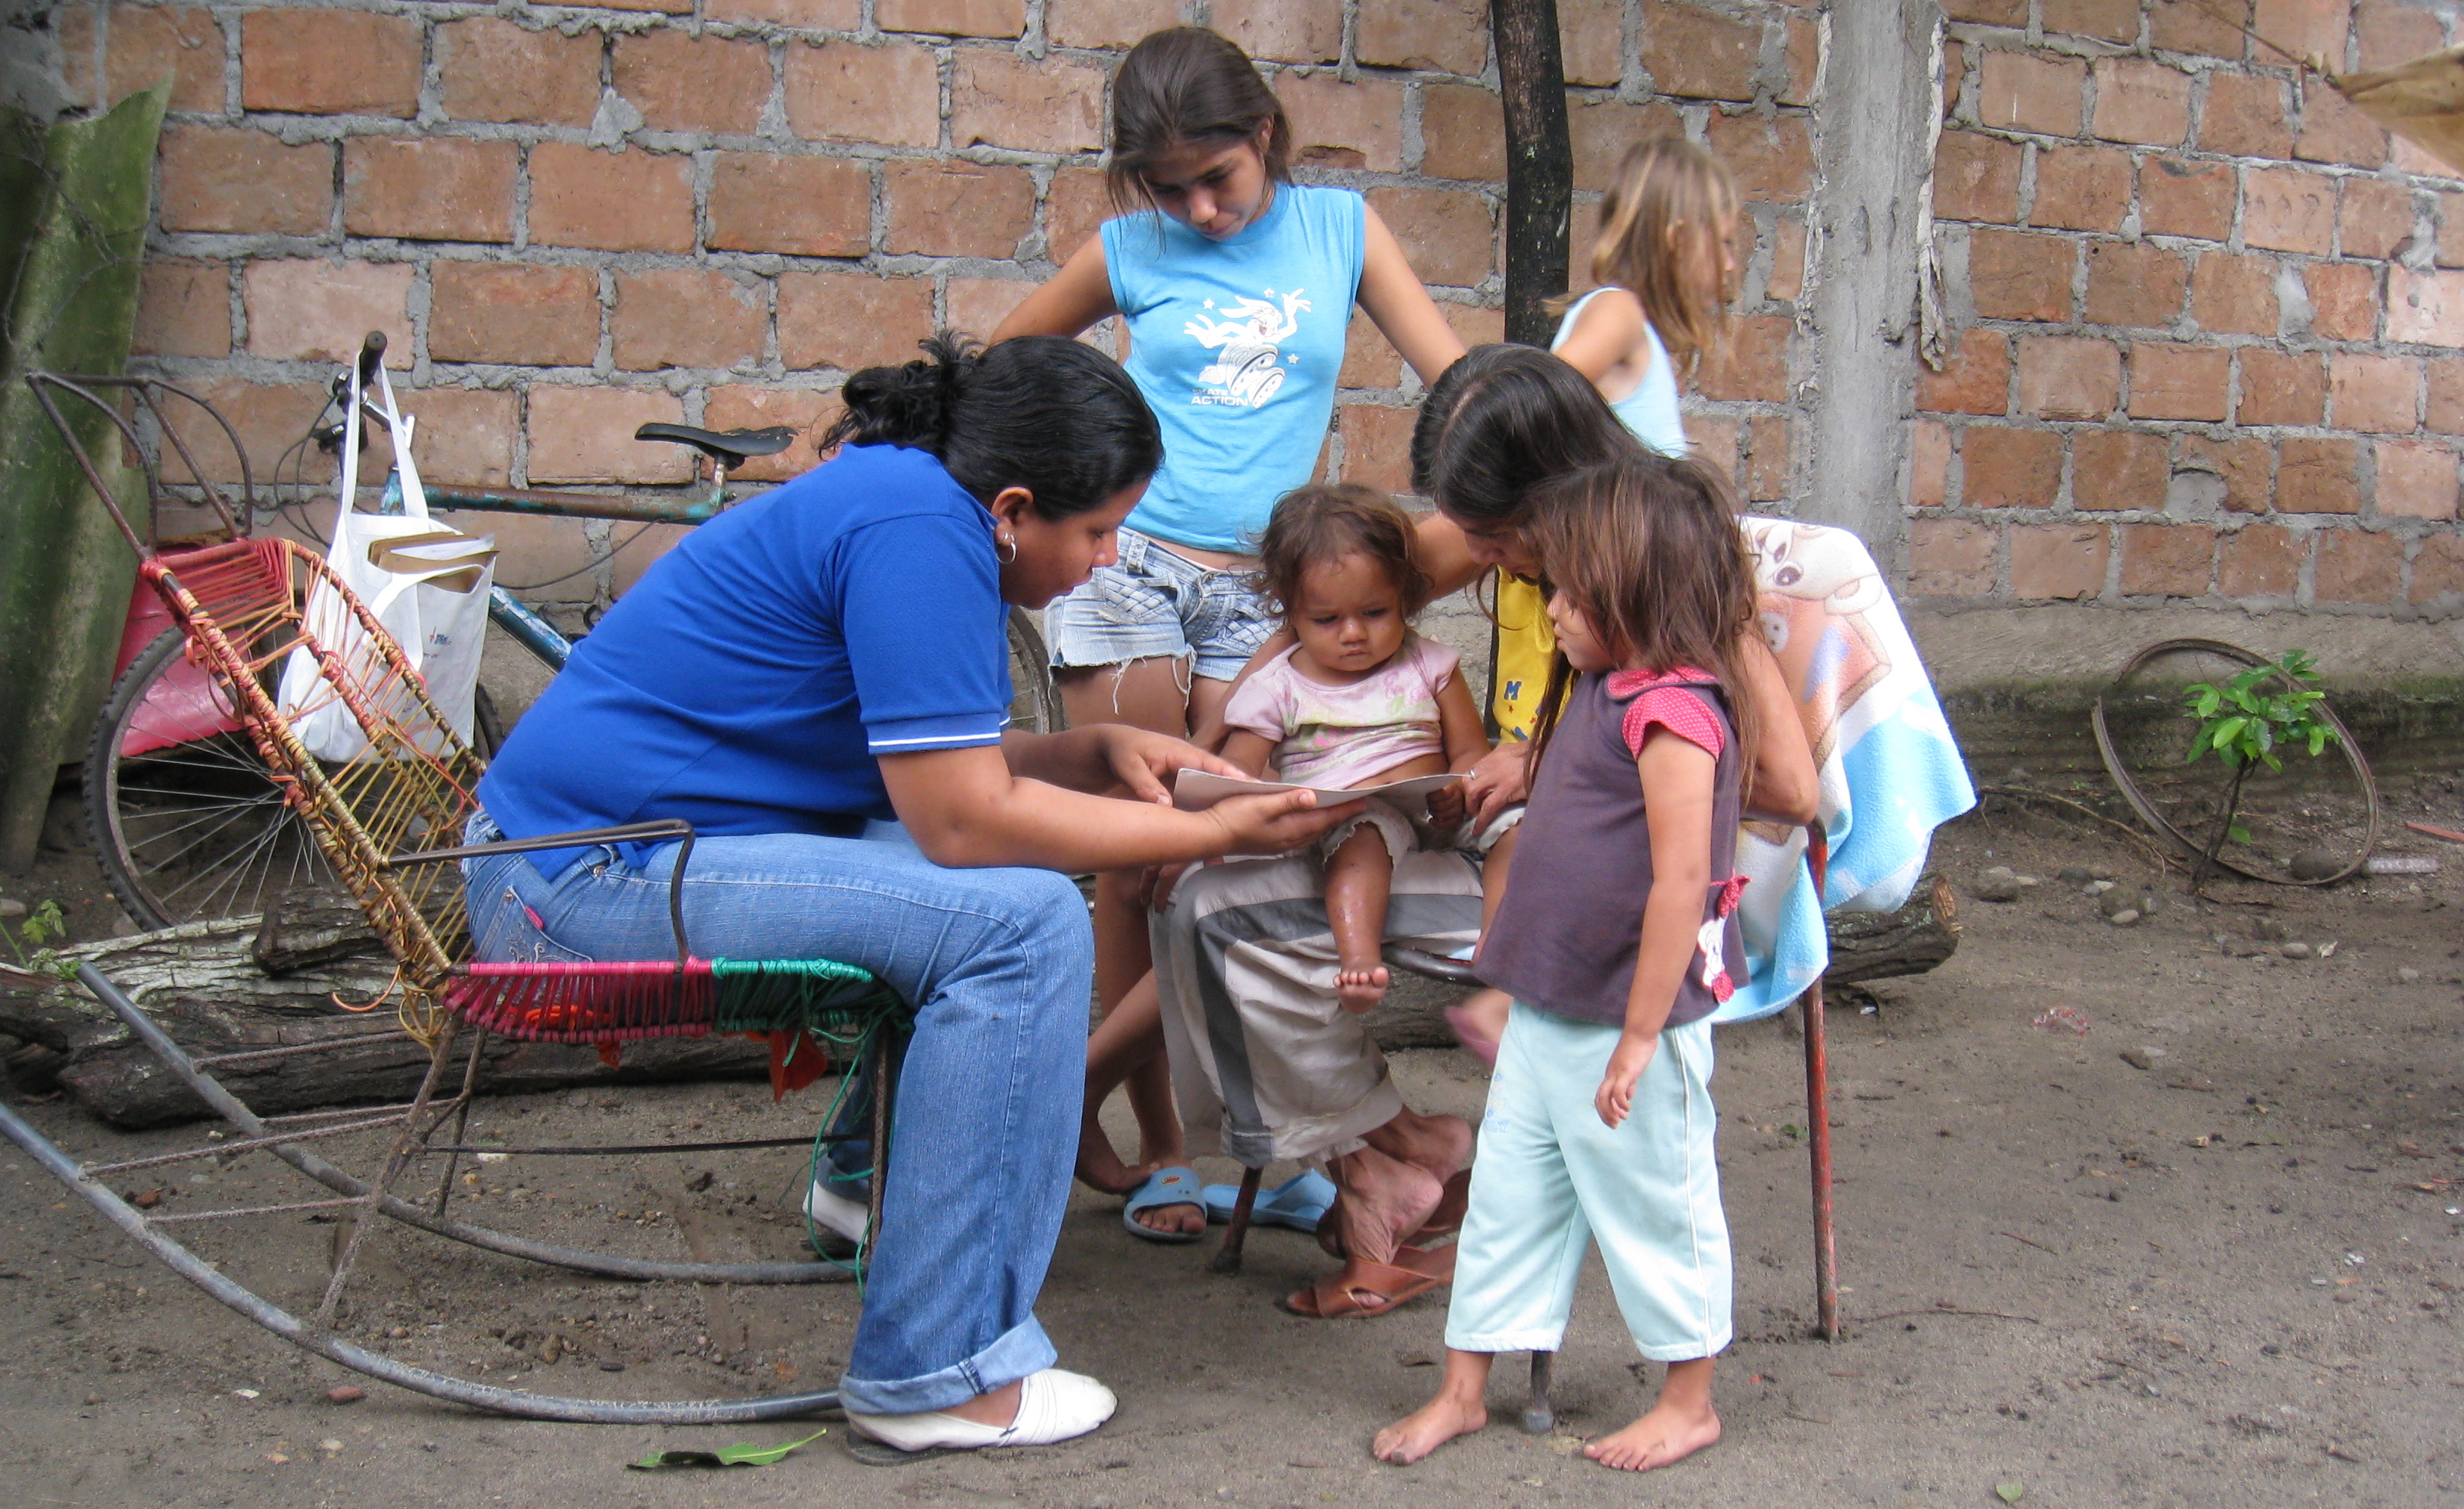 In a dusty courtyard, two women show a young girl a toy.